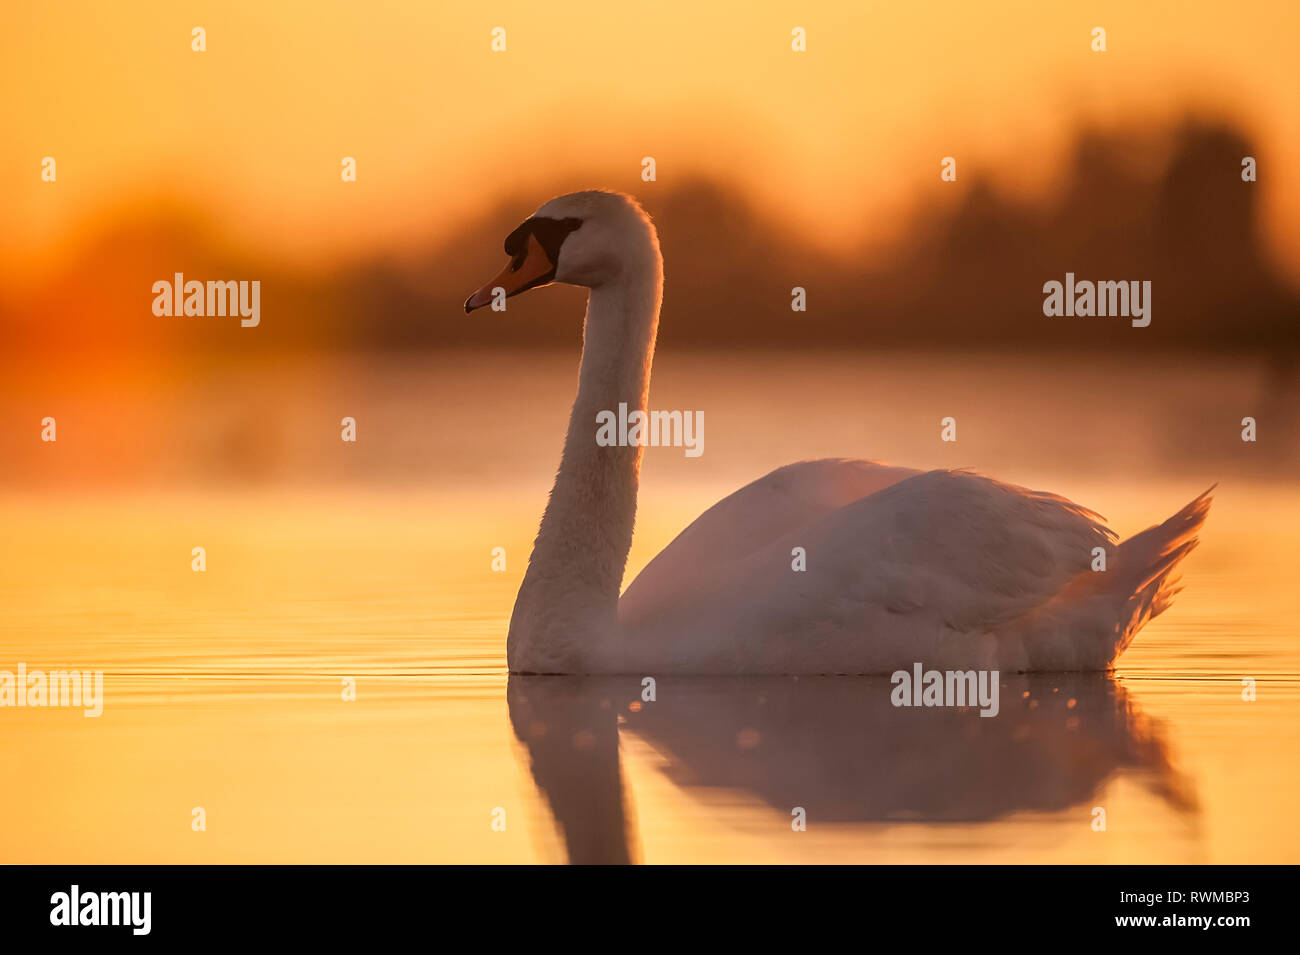 Swan (Cygnus) swimming at sunset with orange sky reflected on the tranquil water; Hungary Stock Photo